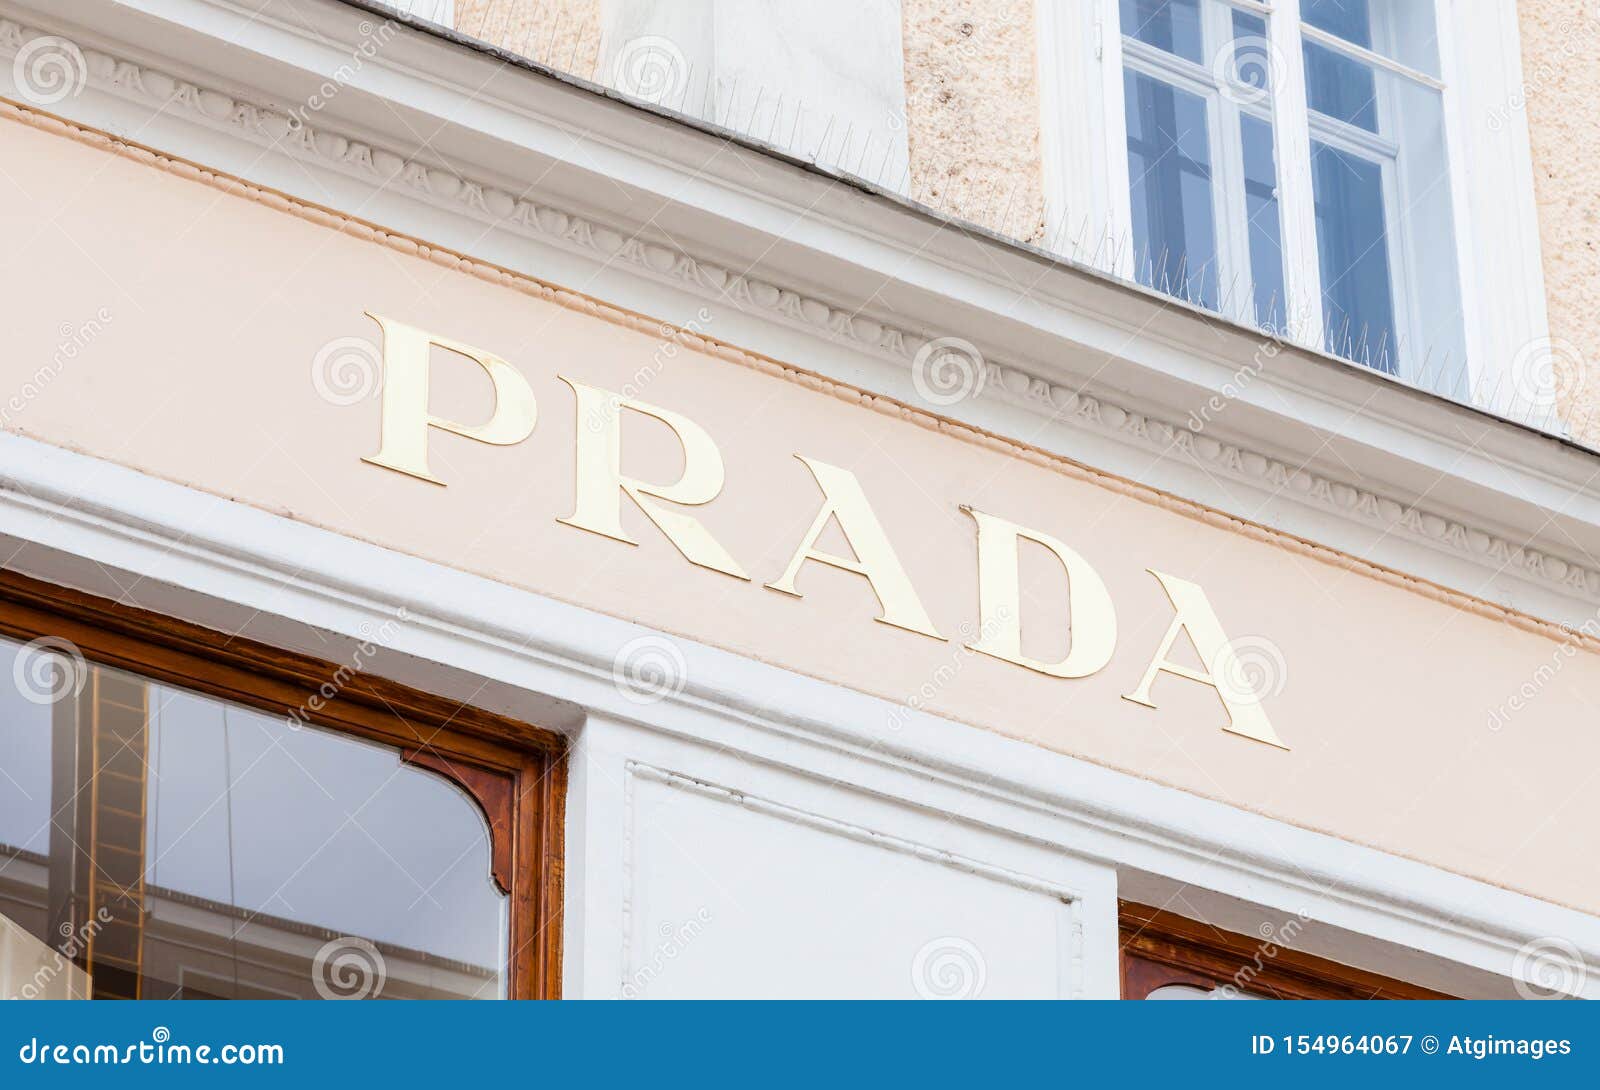 The Prada Nameplate Outside a Shop Editorial Photography - Image of color,  front: 154964067